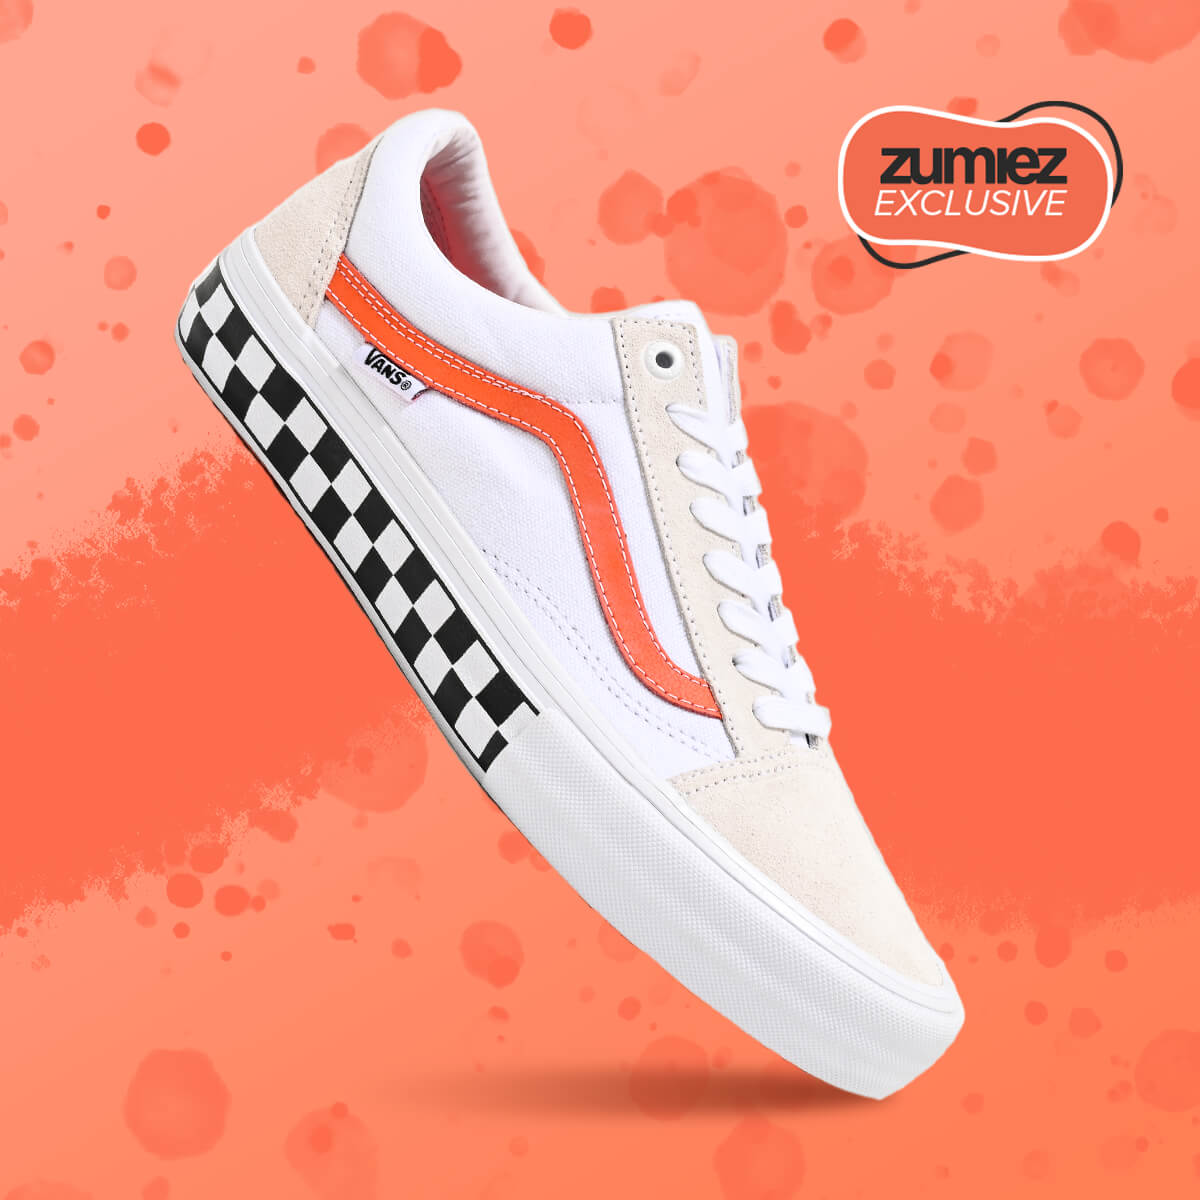 VANS NEW ARRIVAL CHECKERBOARD STYLES - SHOP NEW SHOES